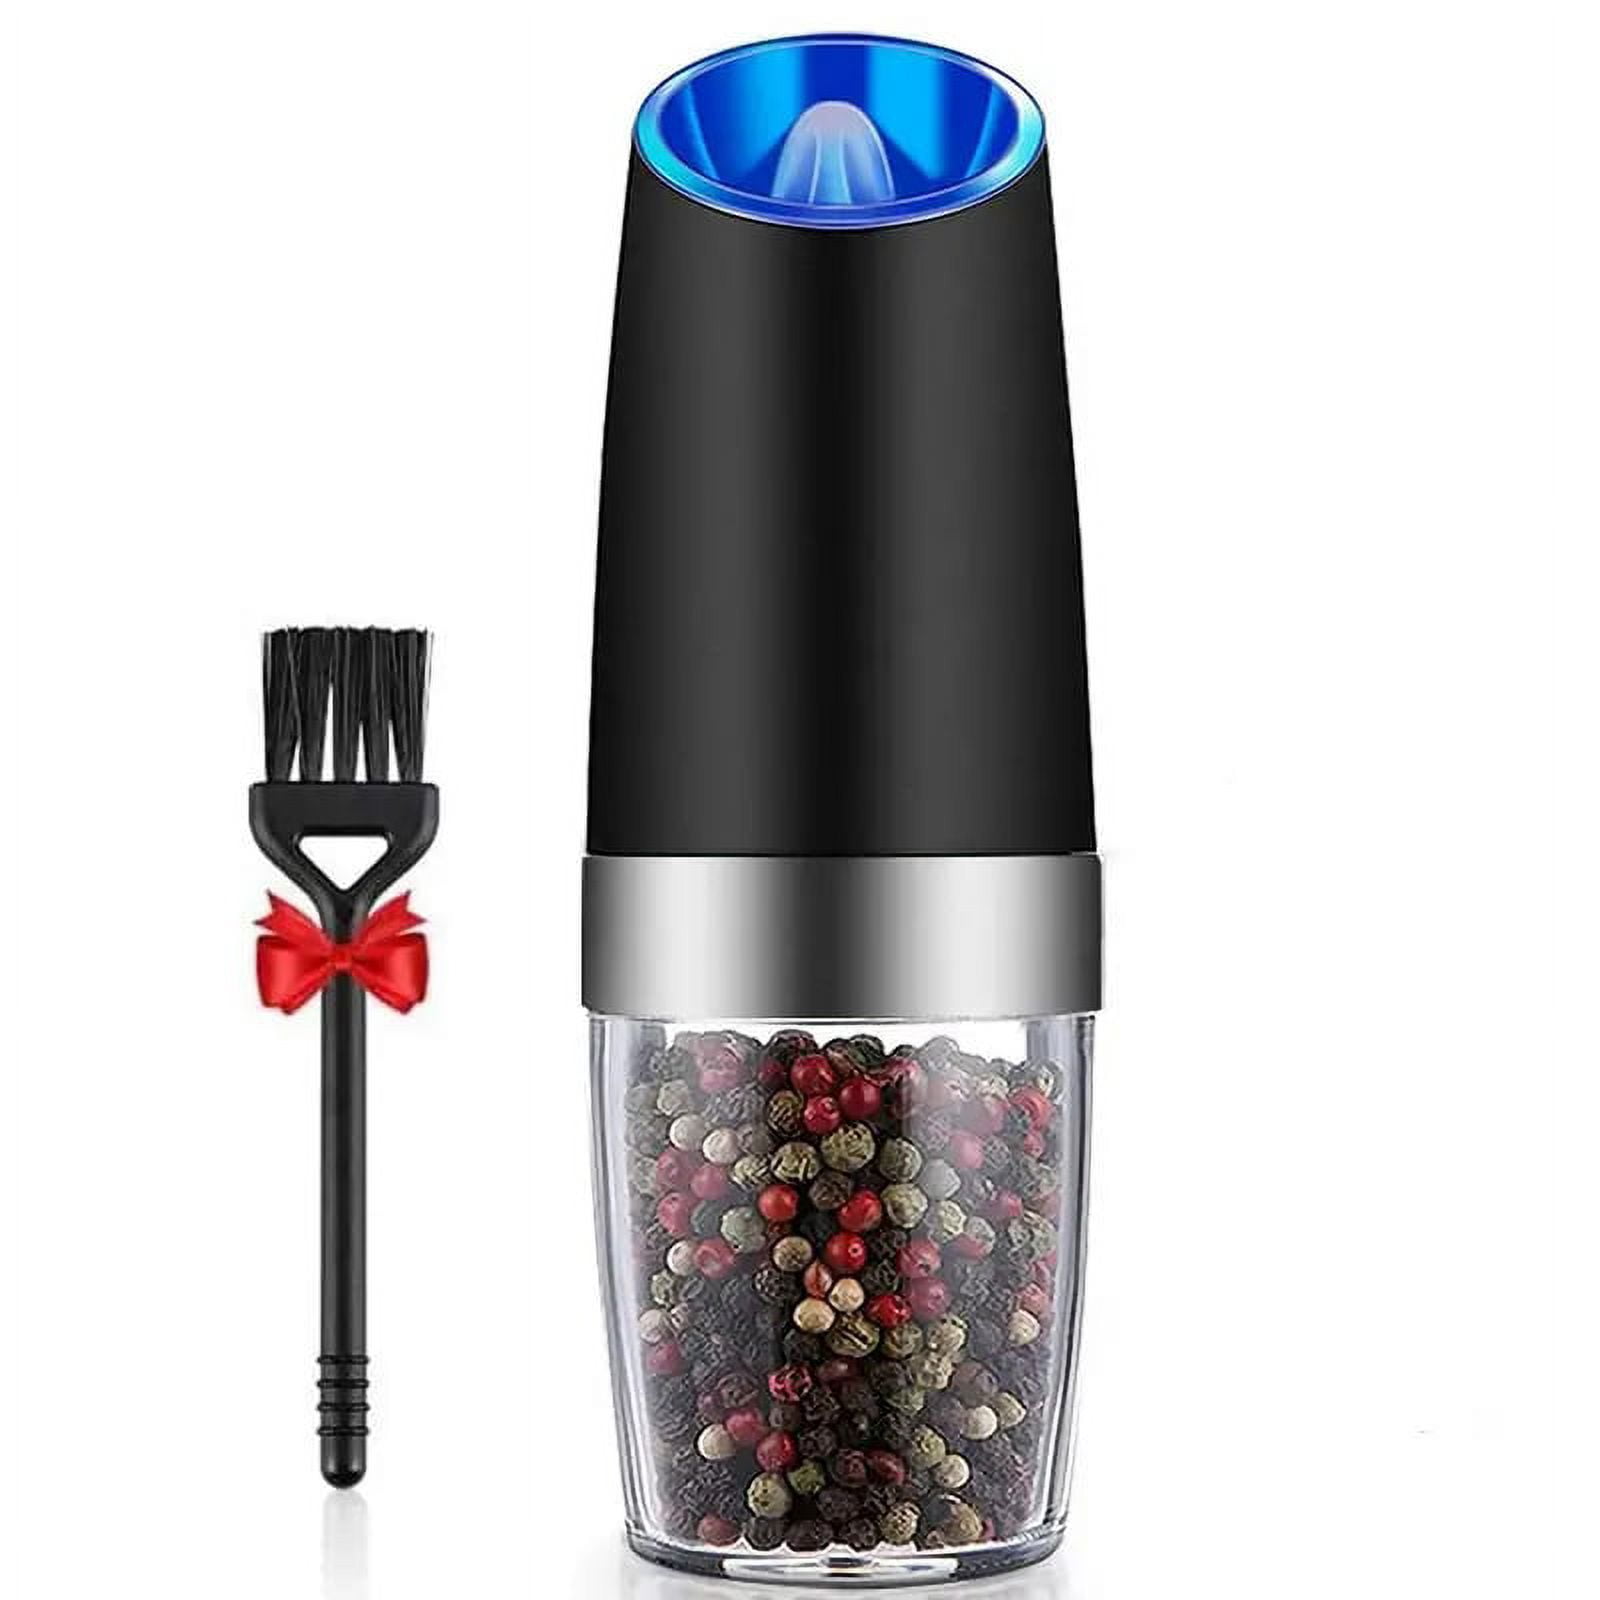 LaGoldoo 2 pcs Electric Salt and Pepper Grinder Set, Thanksgiving Day Gifts Automatic  Gravity Pepper and Salt Mill with Adjustable Coarseness, Battery Operated  One Hand Mill Kit with LED Light price in